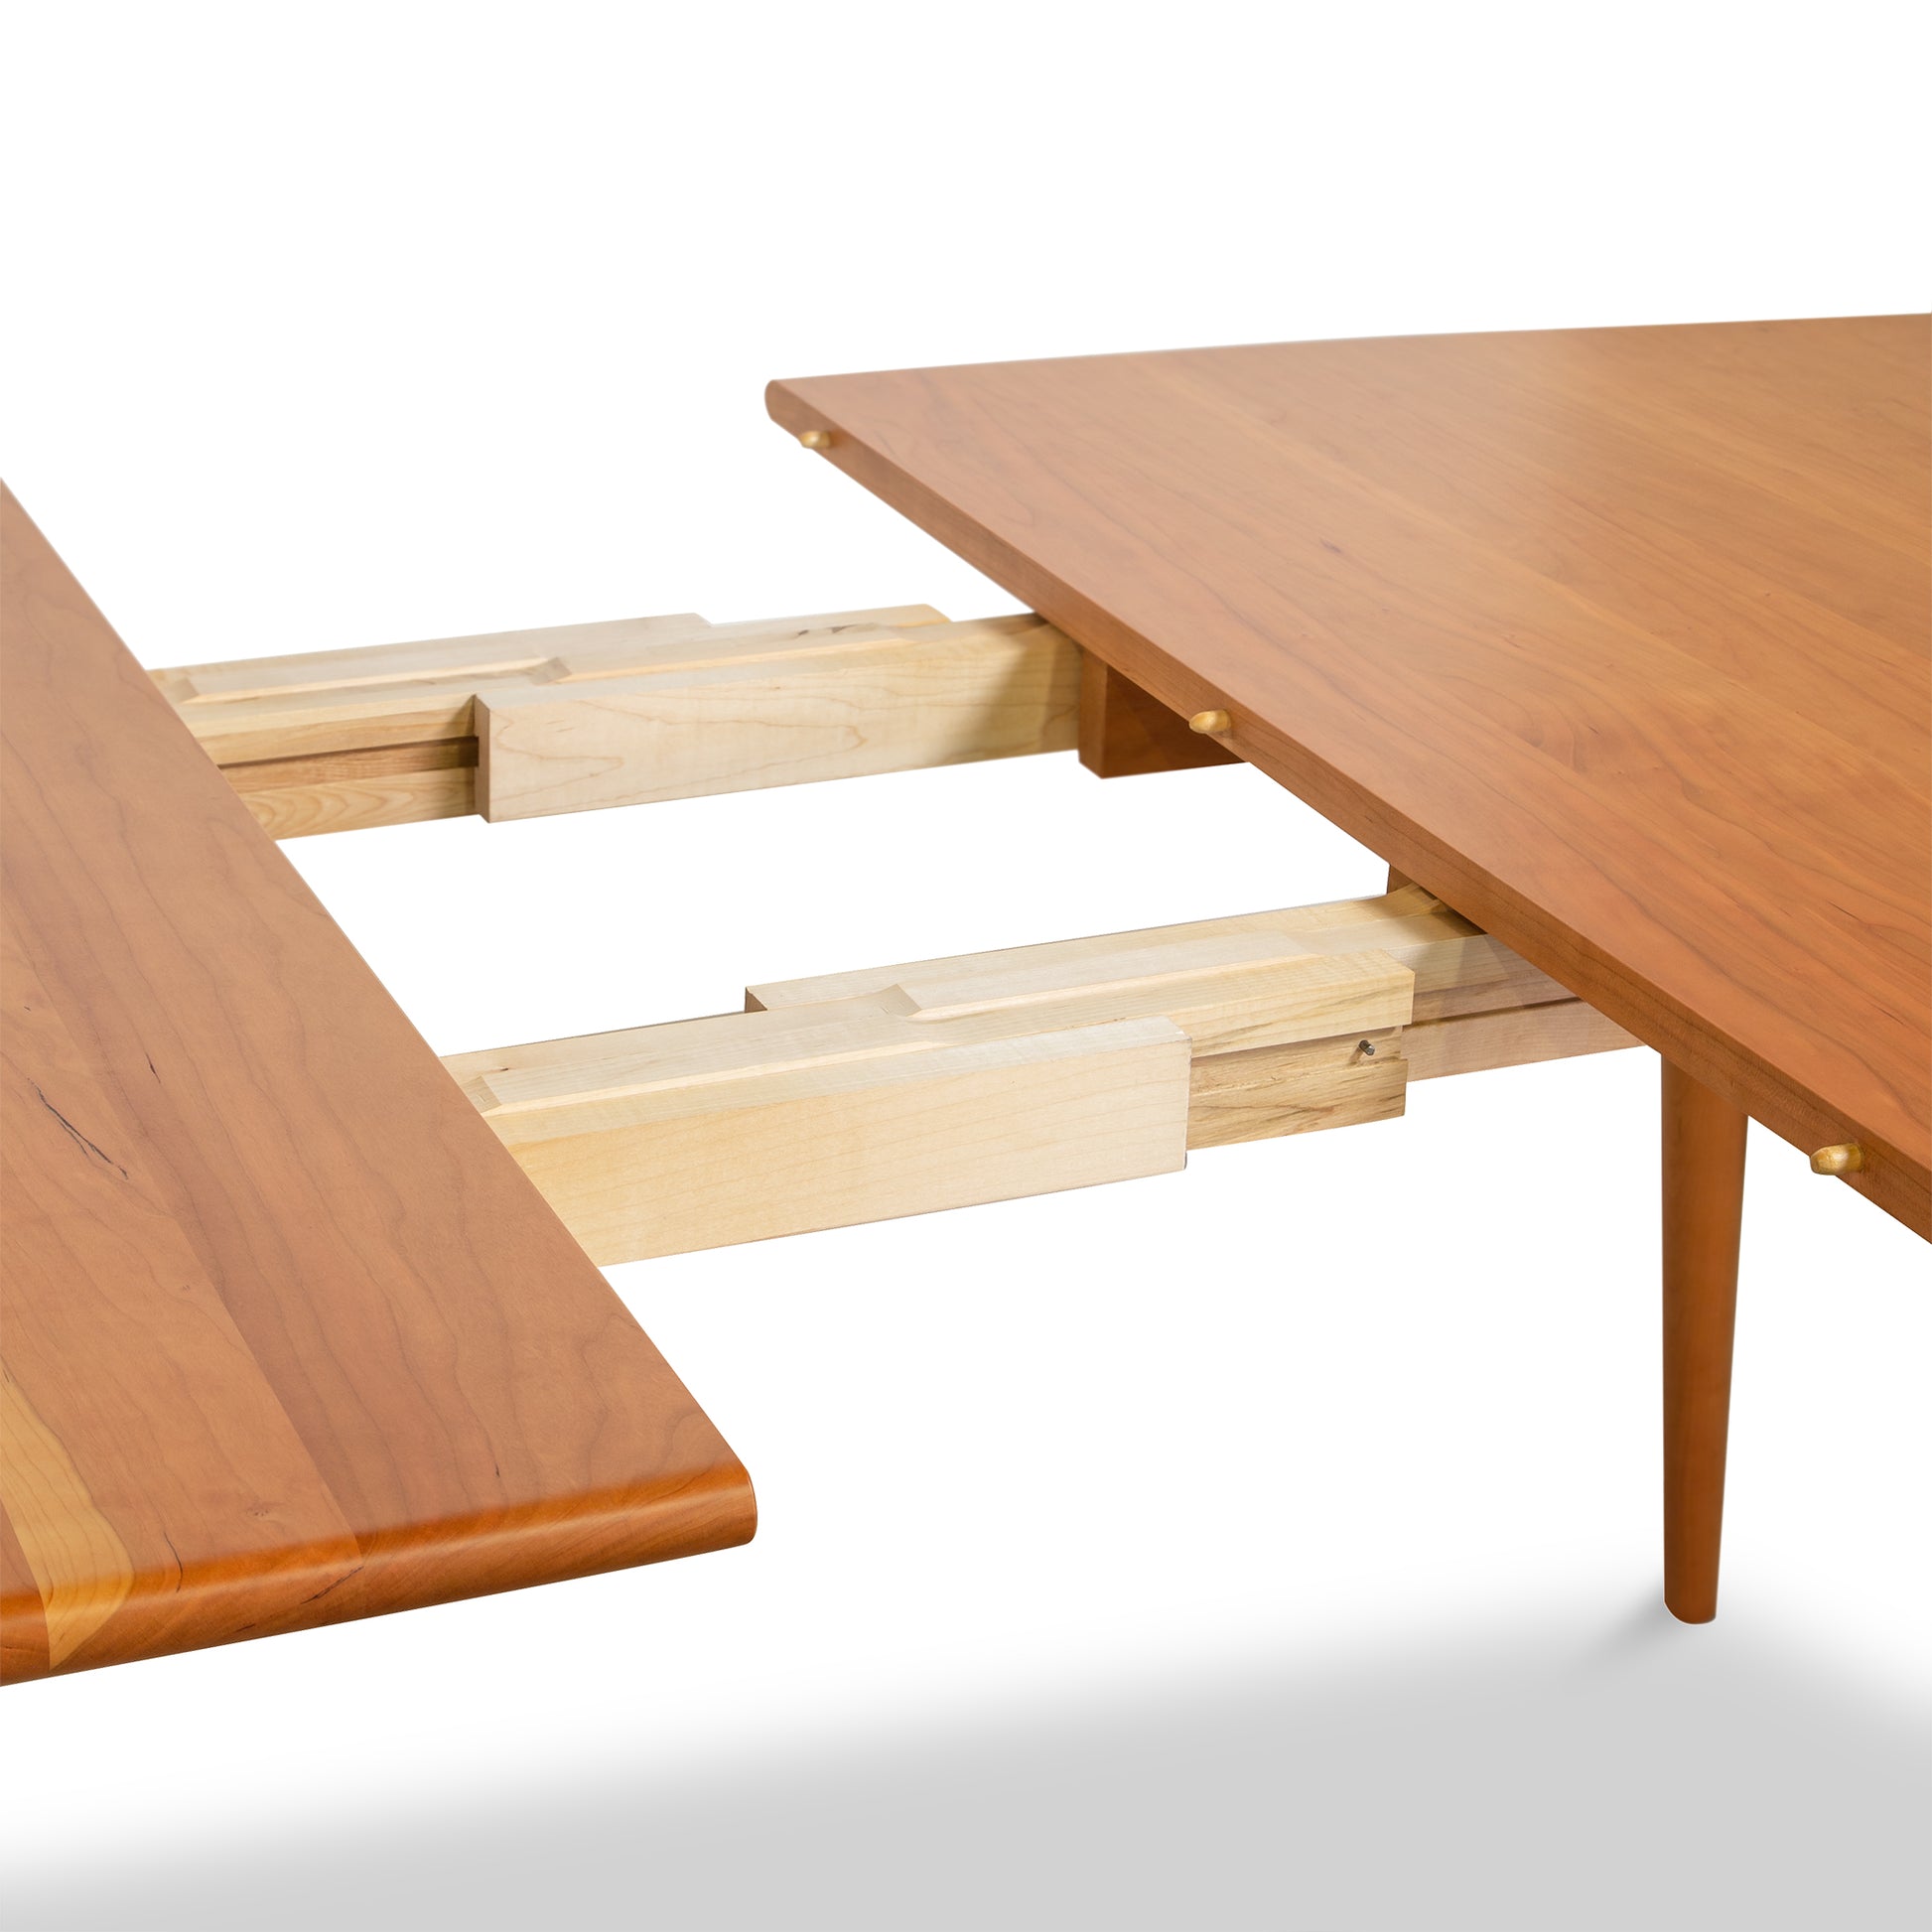 A mid-century modern dining room table with a wooden top from Lyndon Furniture's Addison Boat Top Extension Dining Table - Floor Model.